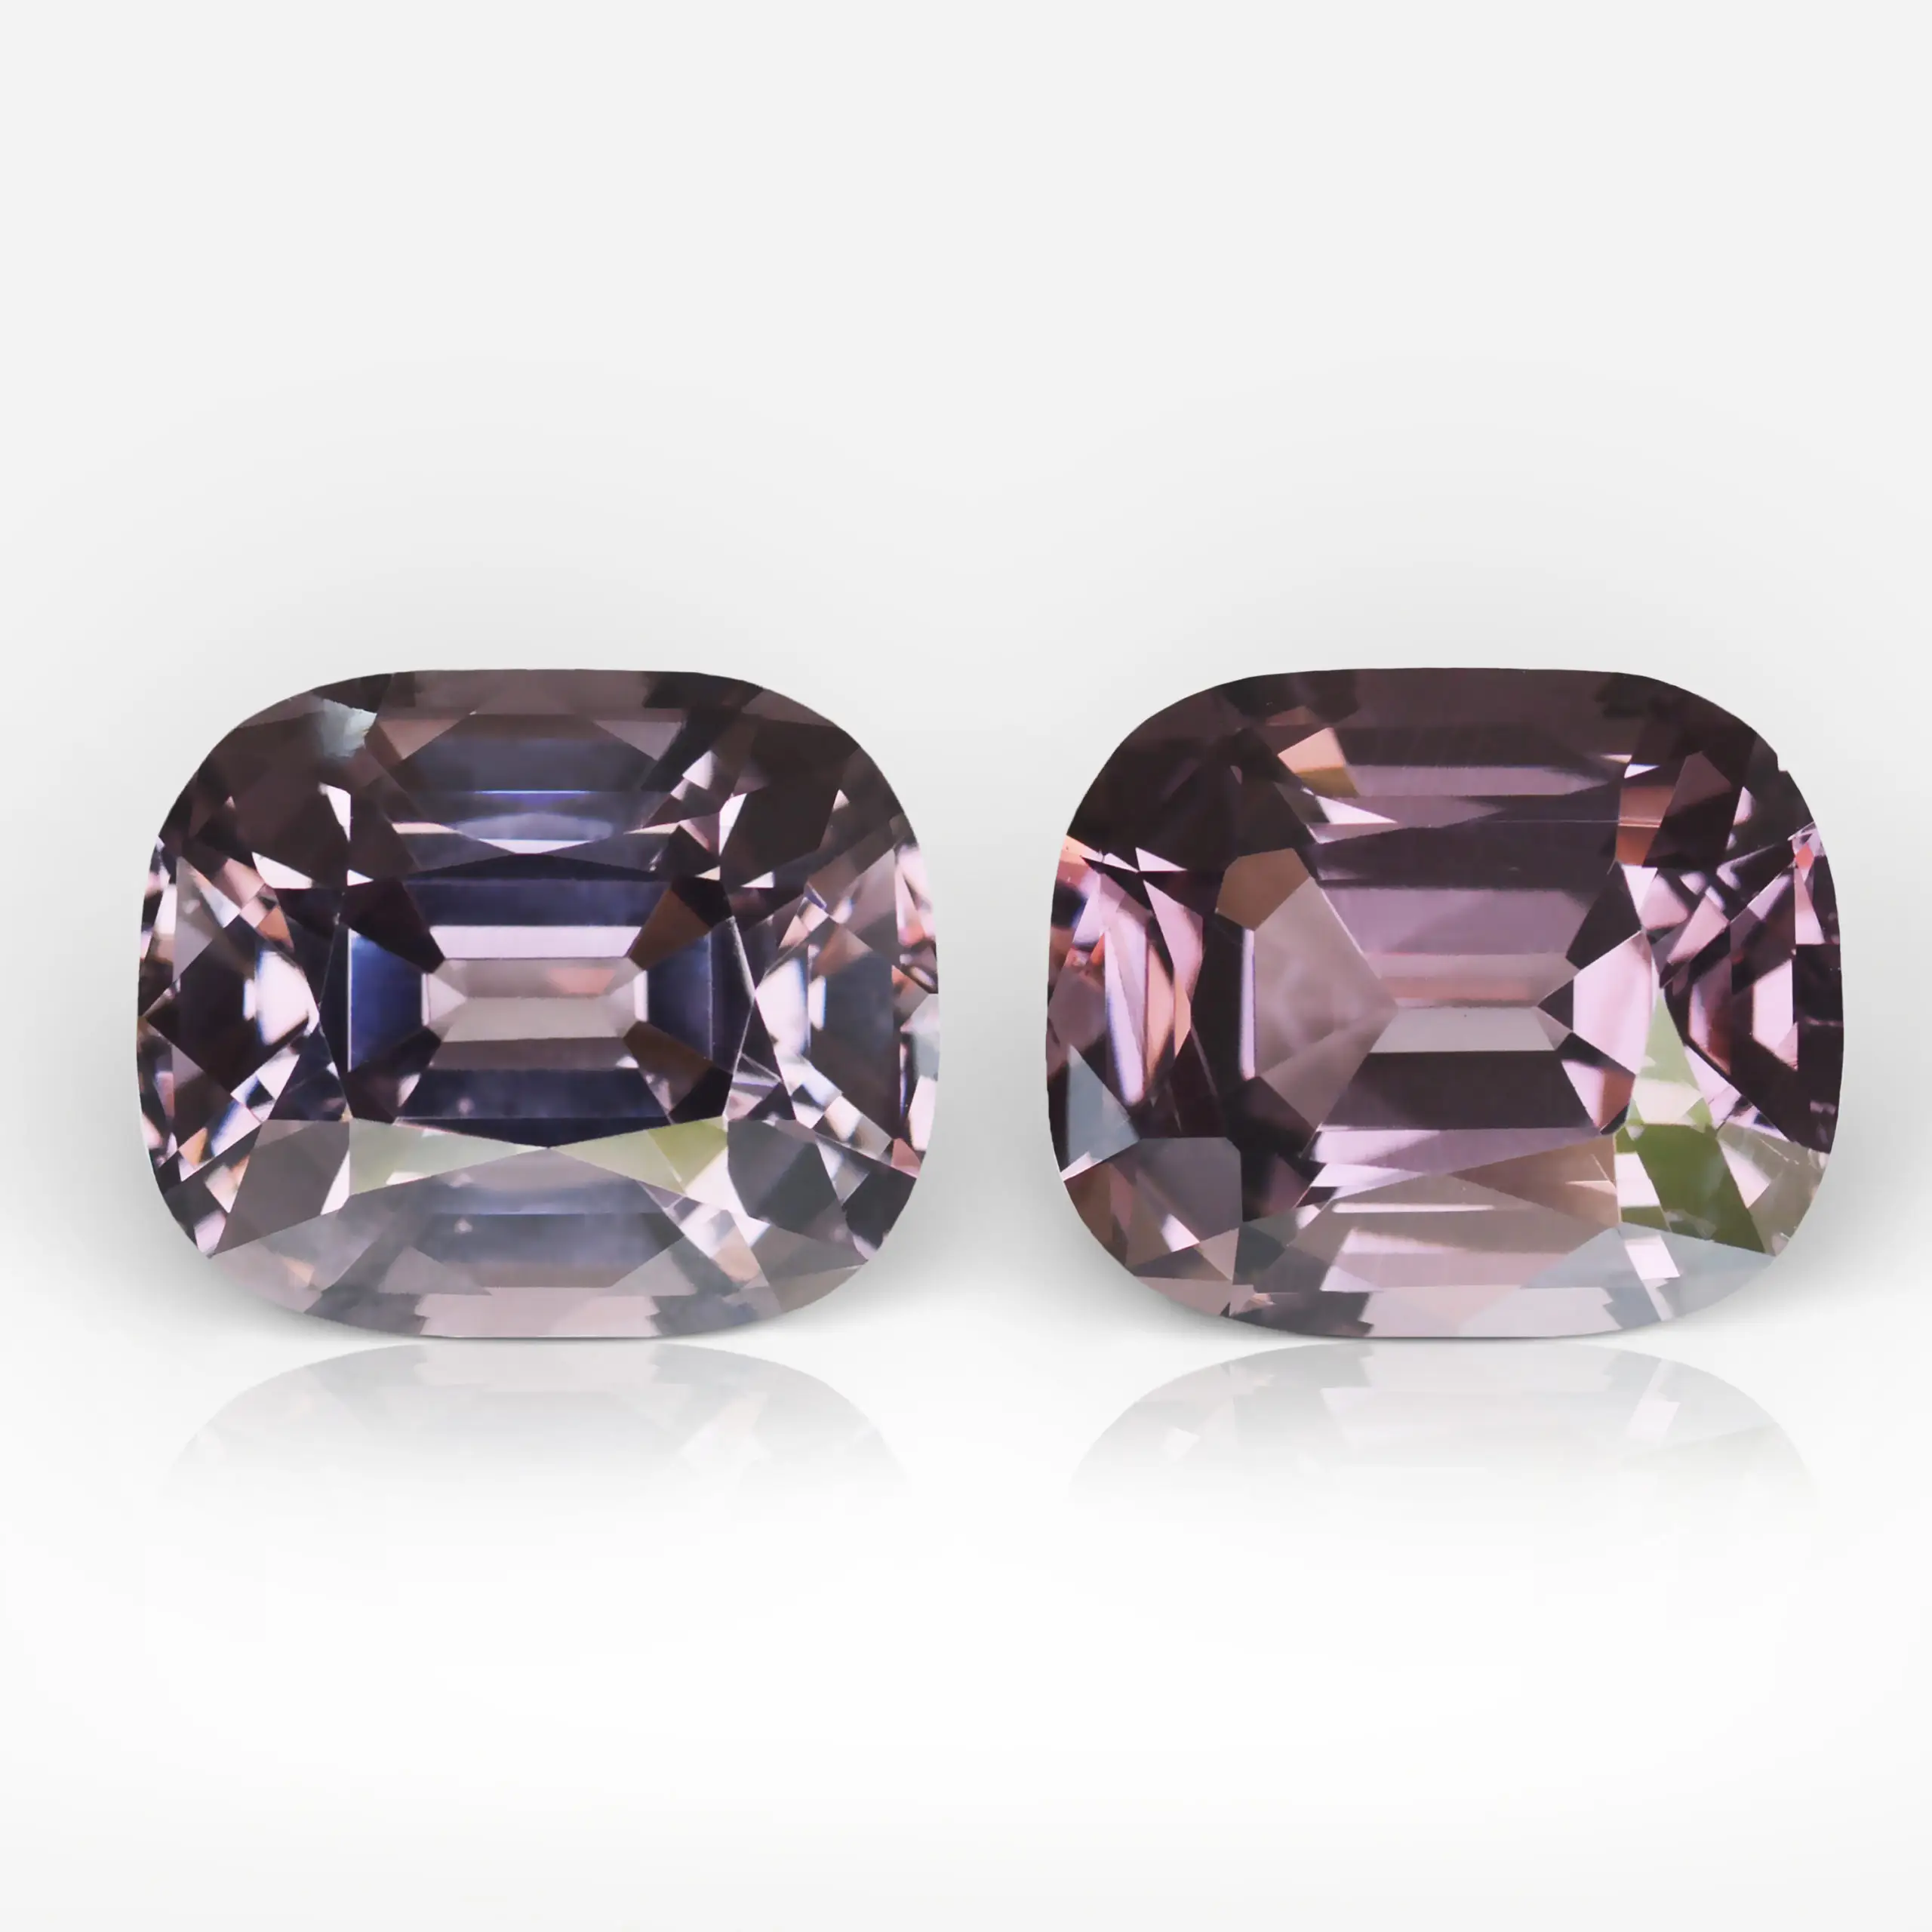 3.00 and 3.31 carat Pair of Cushion Shape Burmese Mauve Spinel - picture 1